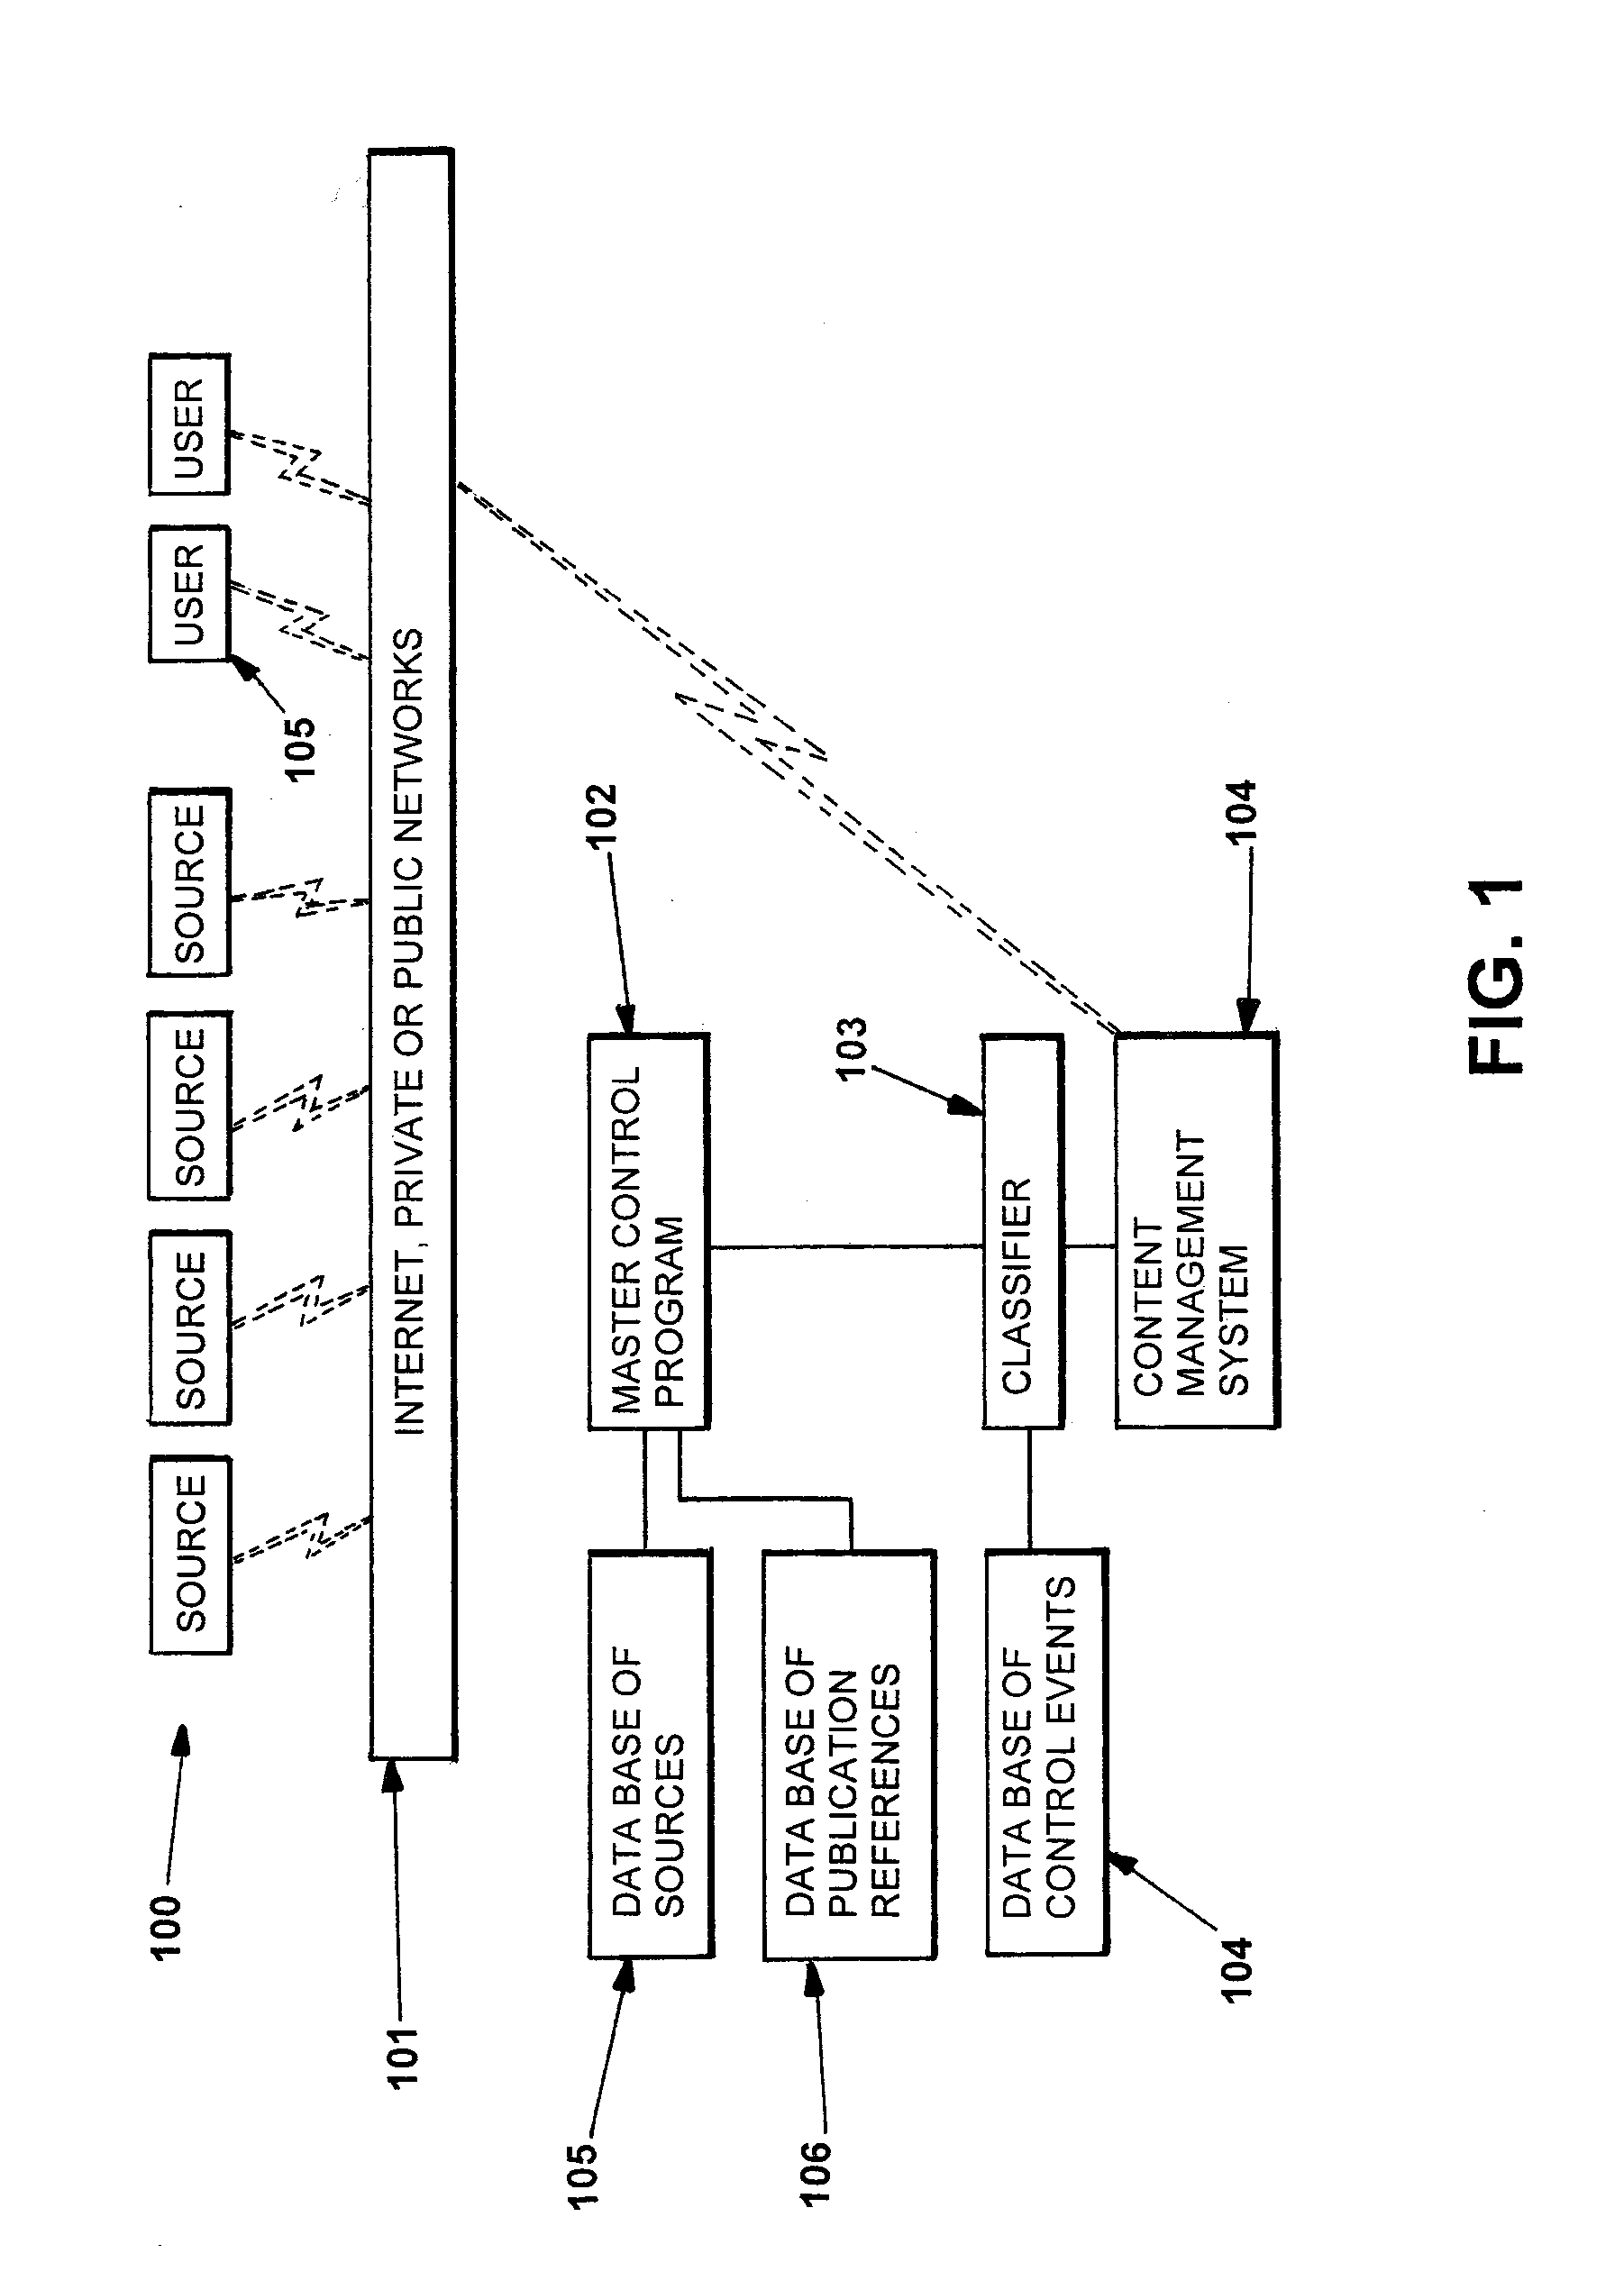 Apparatus and Method for the Automatic Discovery of Control Events from the Publication of Documents